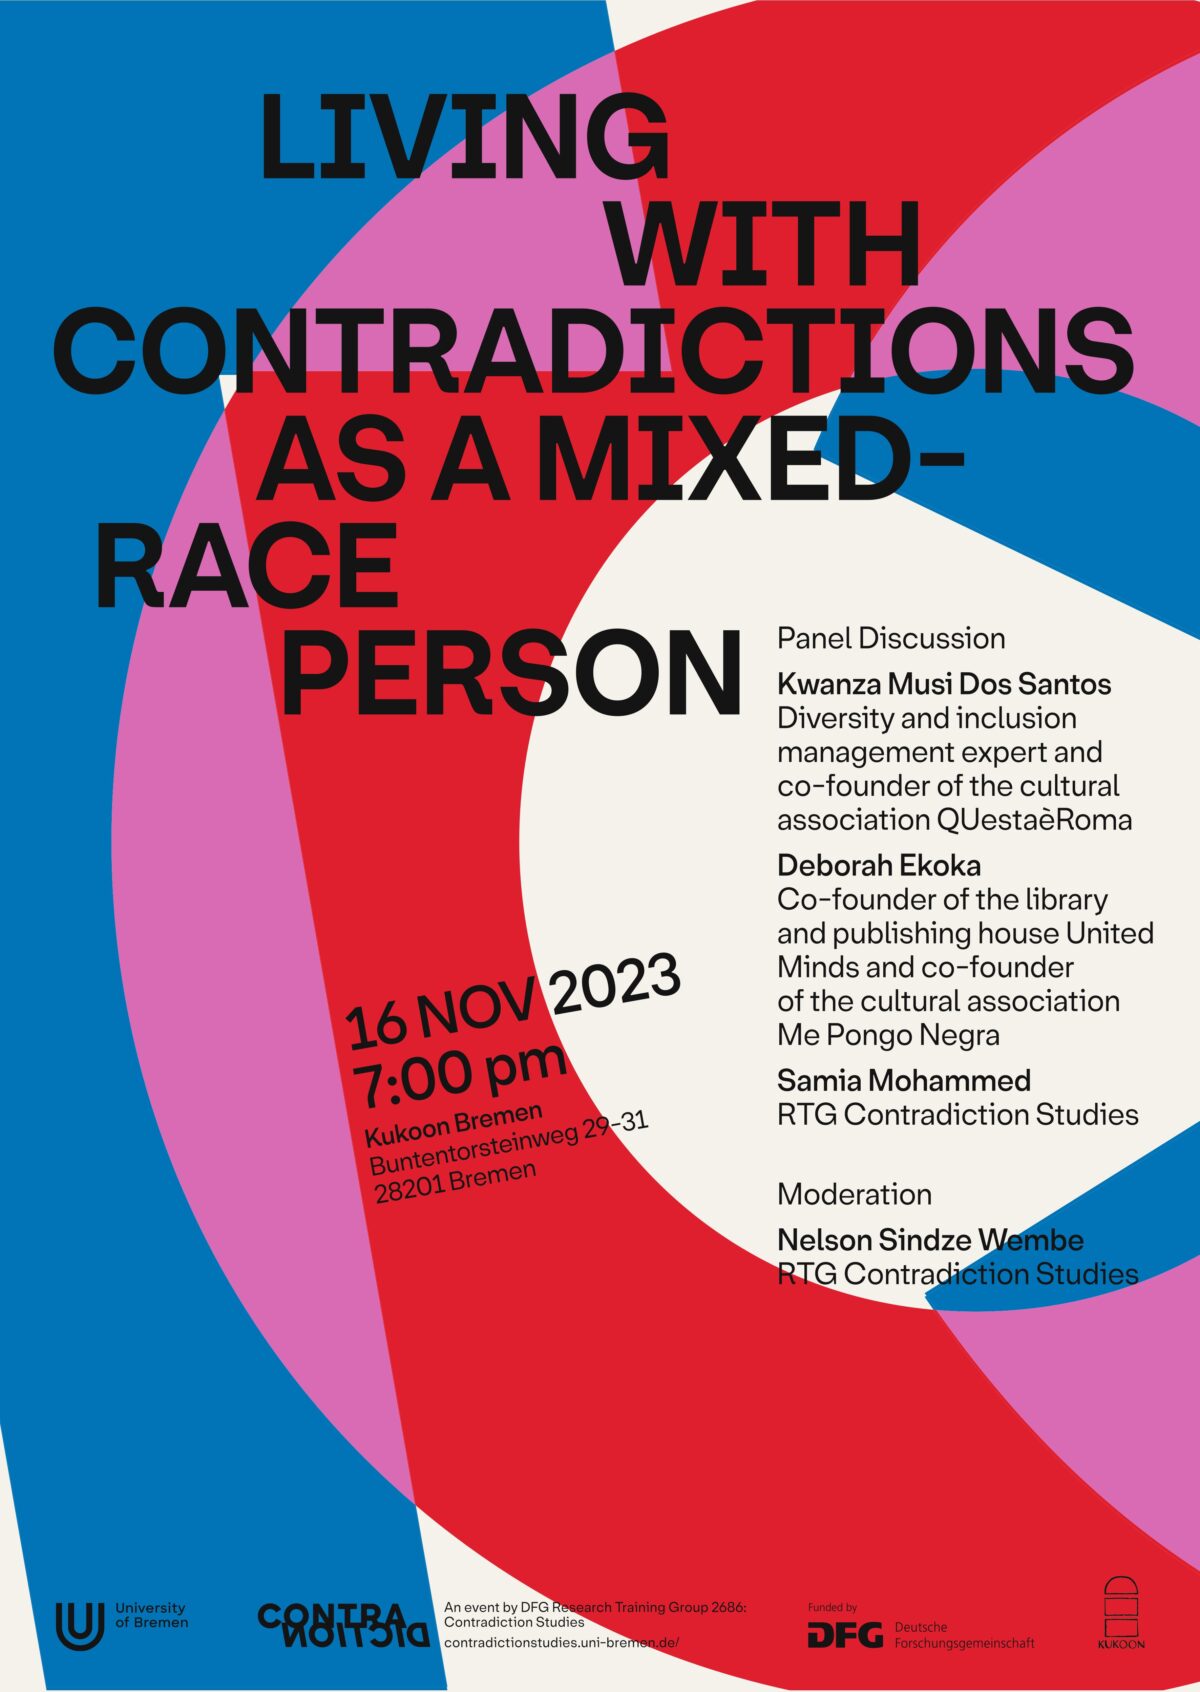 Advertising Poster for the panel discussion Living with contradictions as a mixed-race person.